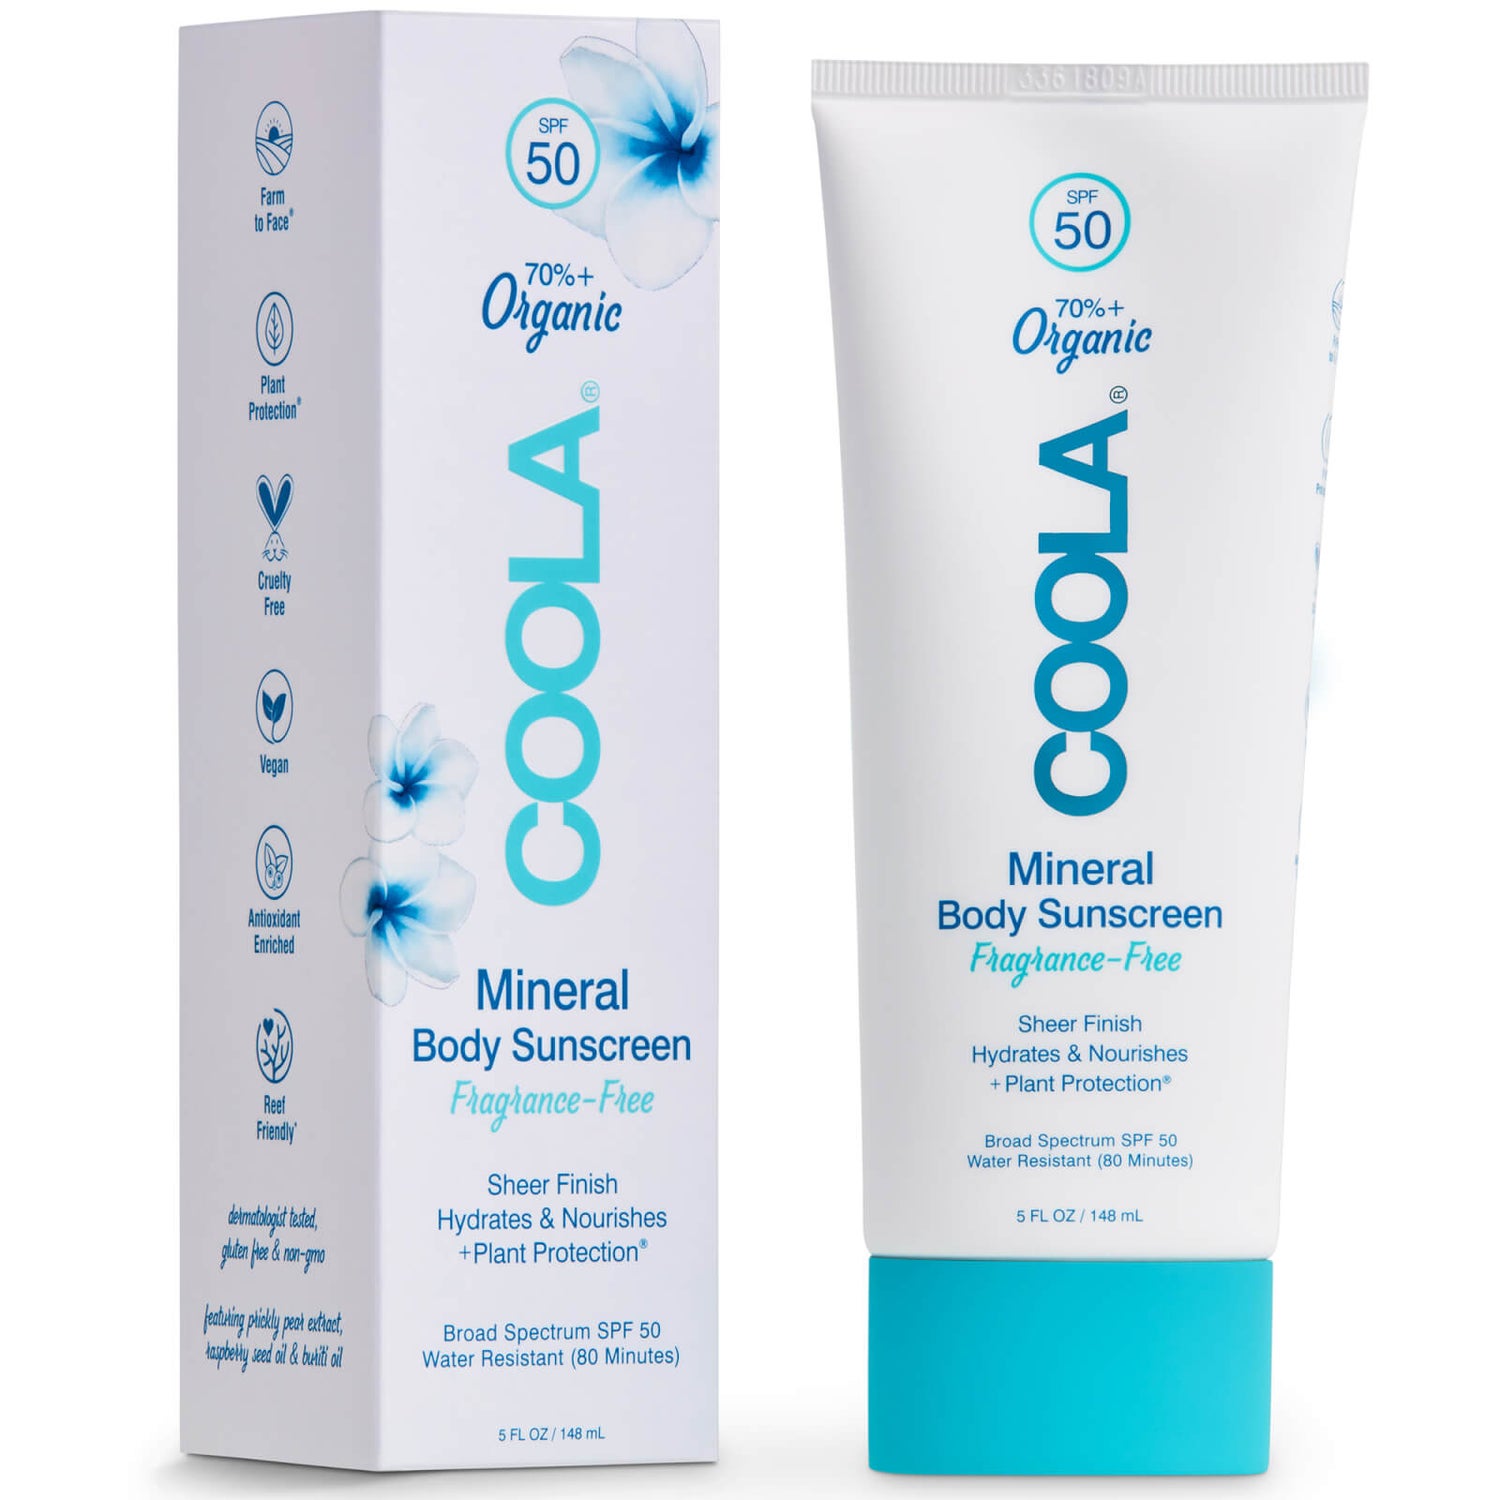 COOLA Mineral Body Sunscreen Lotion SPF 50 - Fragrance-Free (5 oz.)